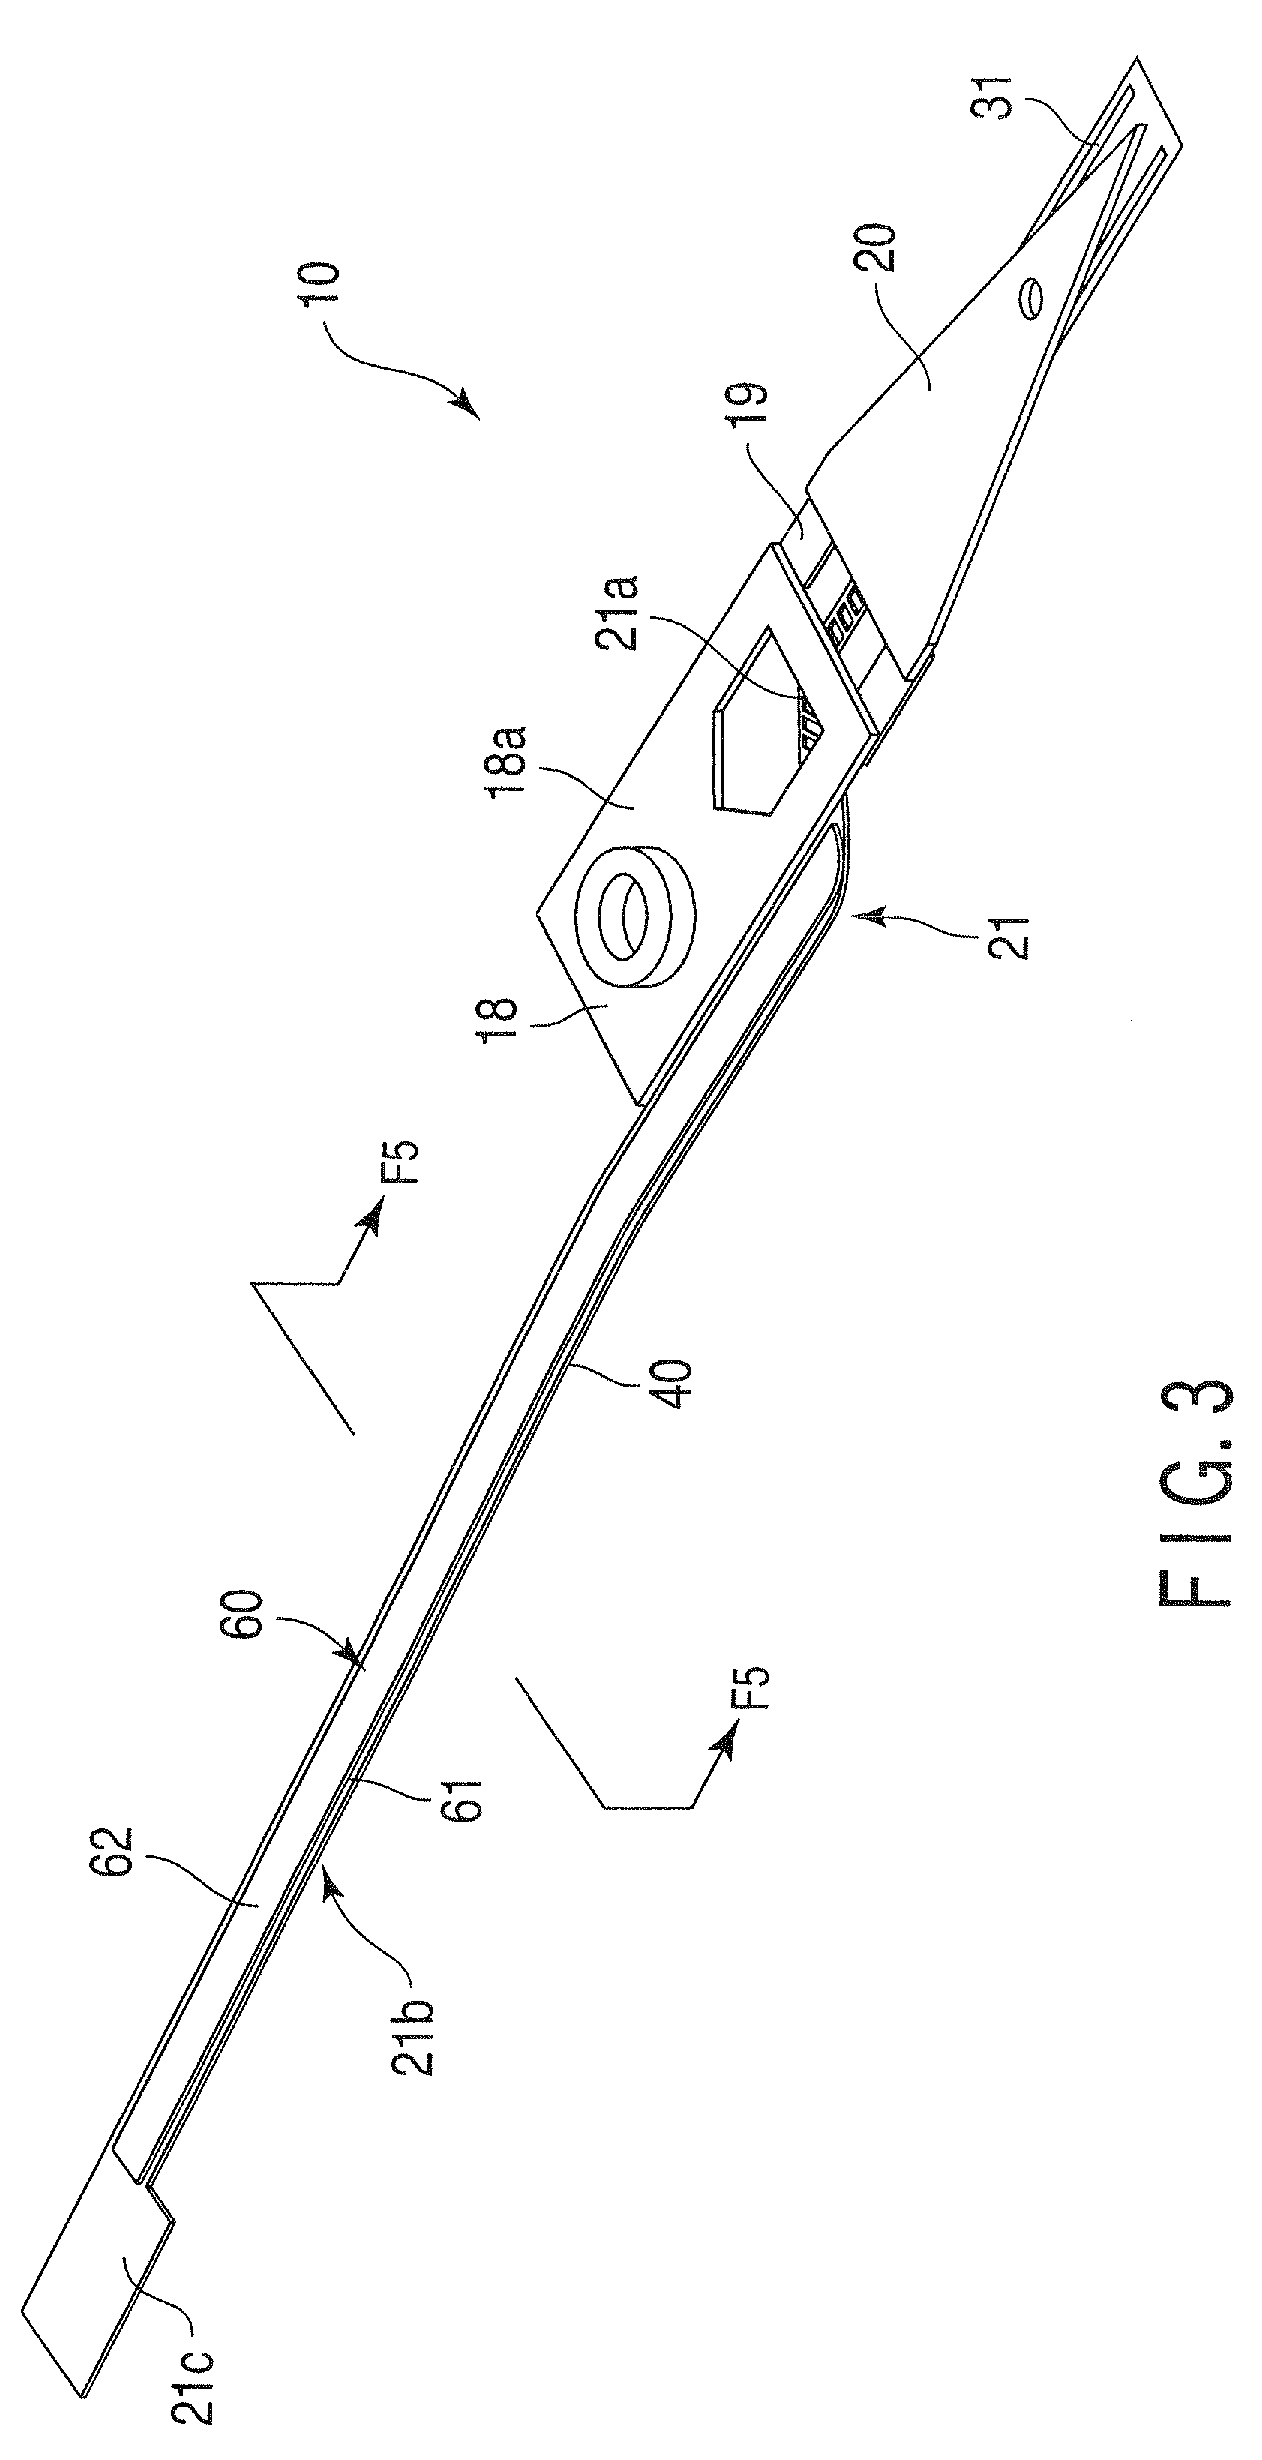 Flexure to be secured to a load beam of a disk drive suspension